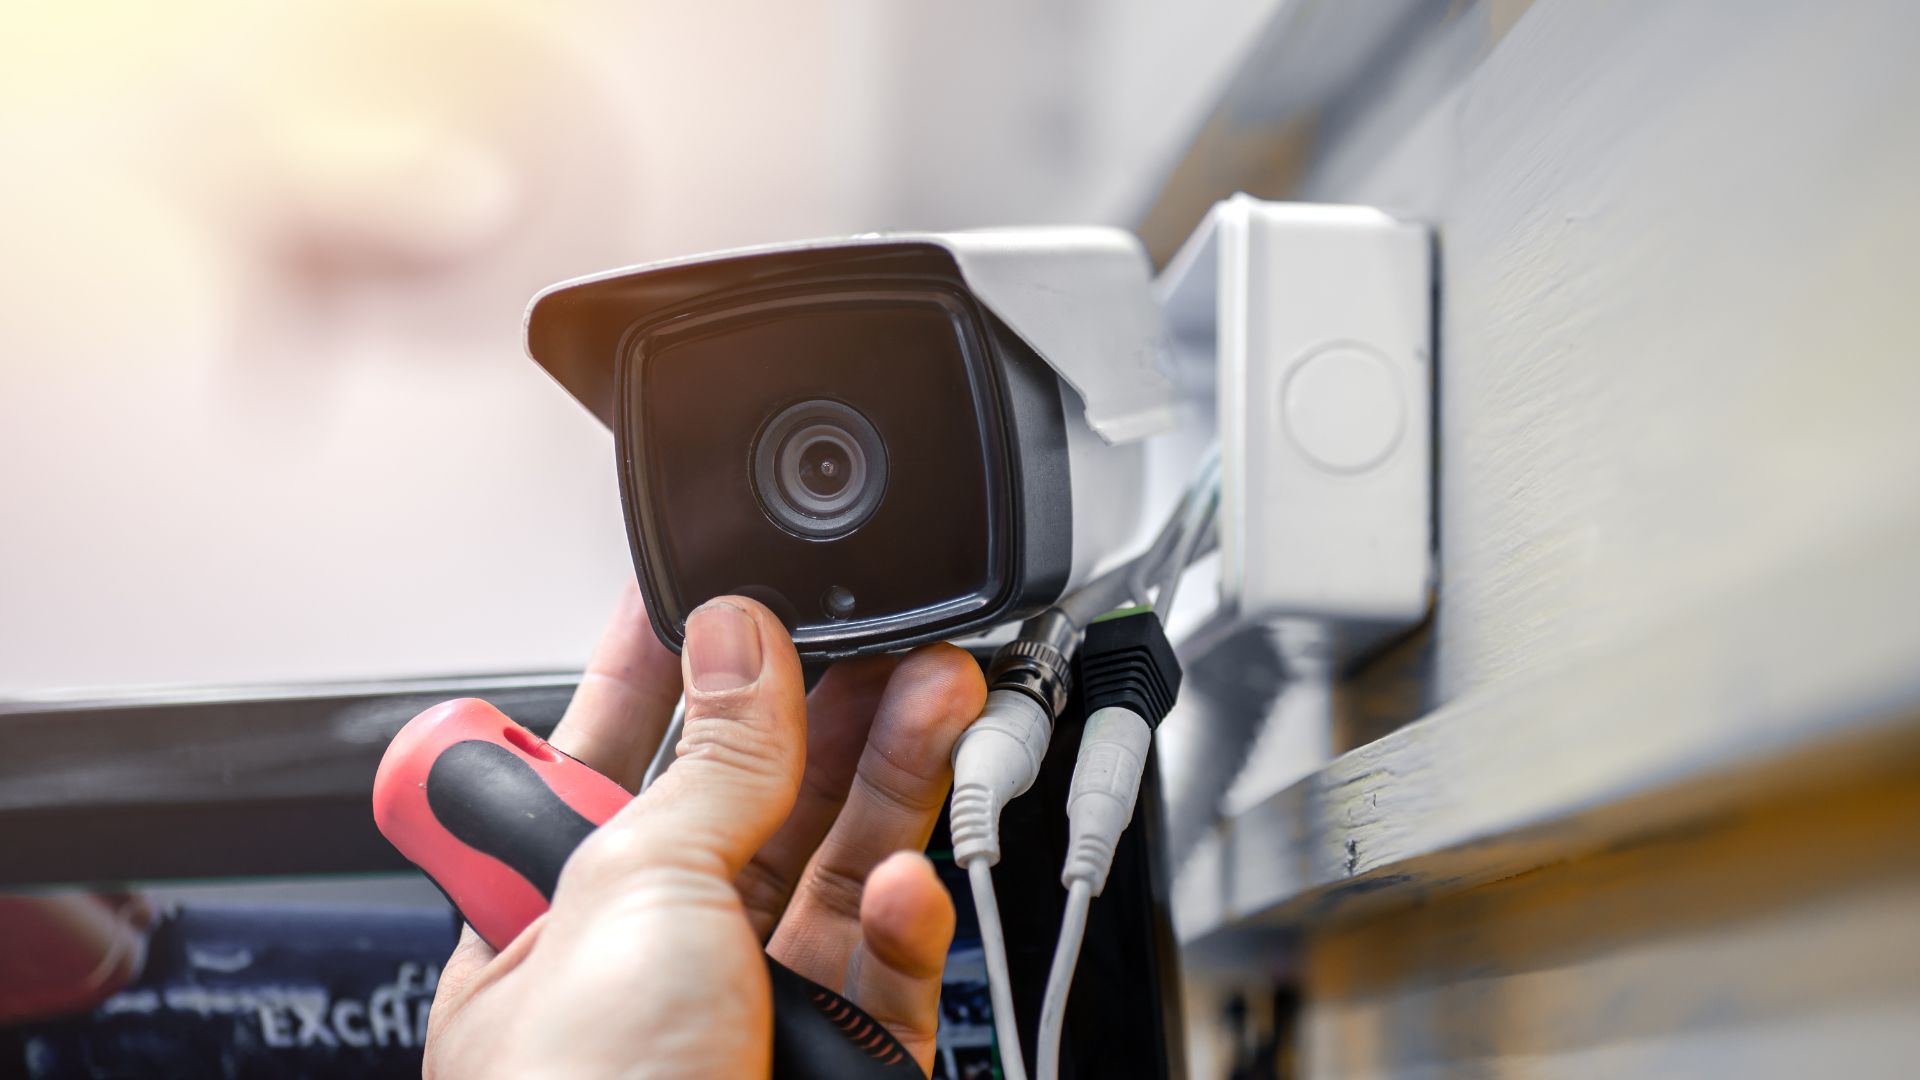 Security Camera Repairs and Replacements: Electrical Services for Reliable Surveillance